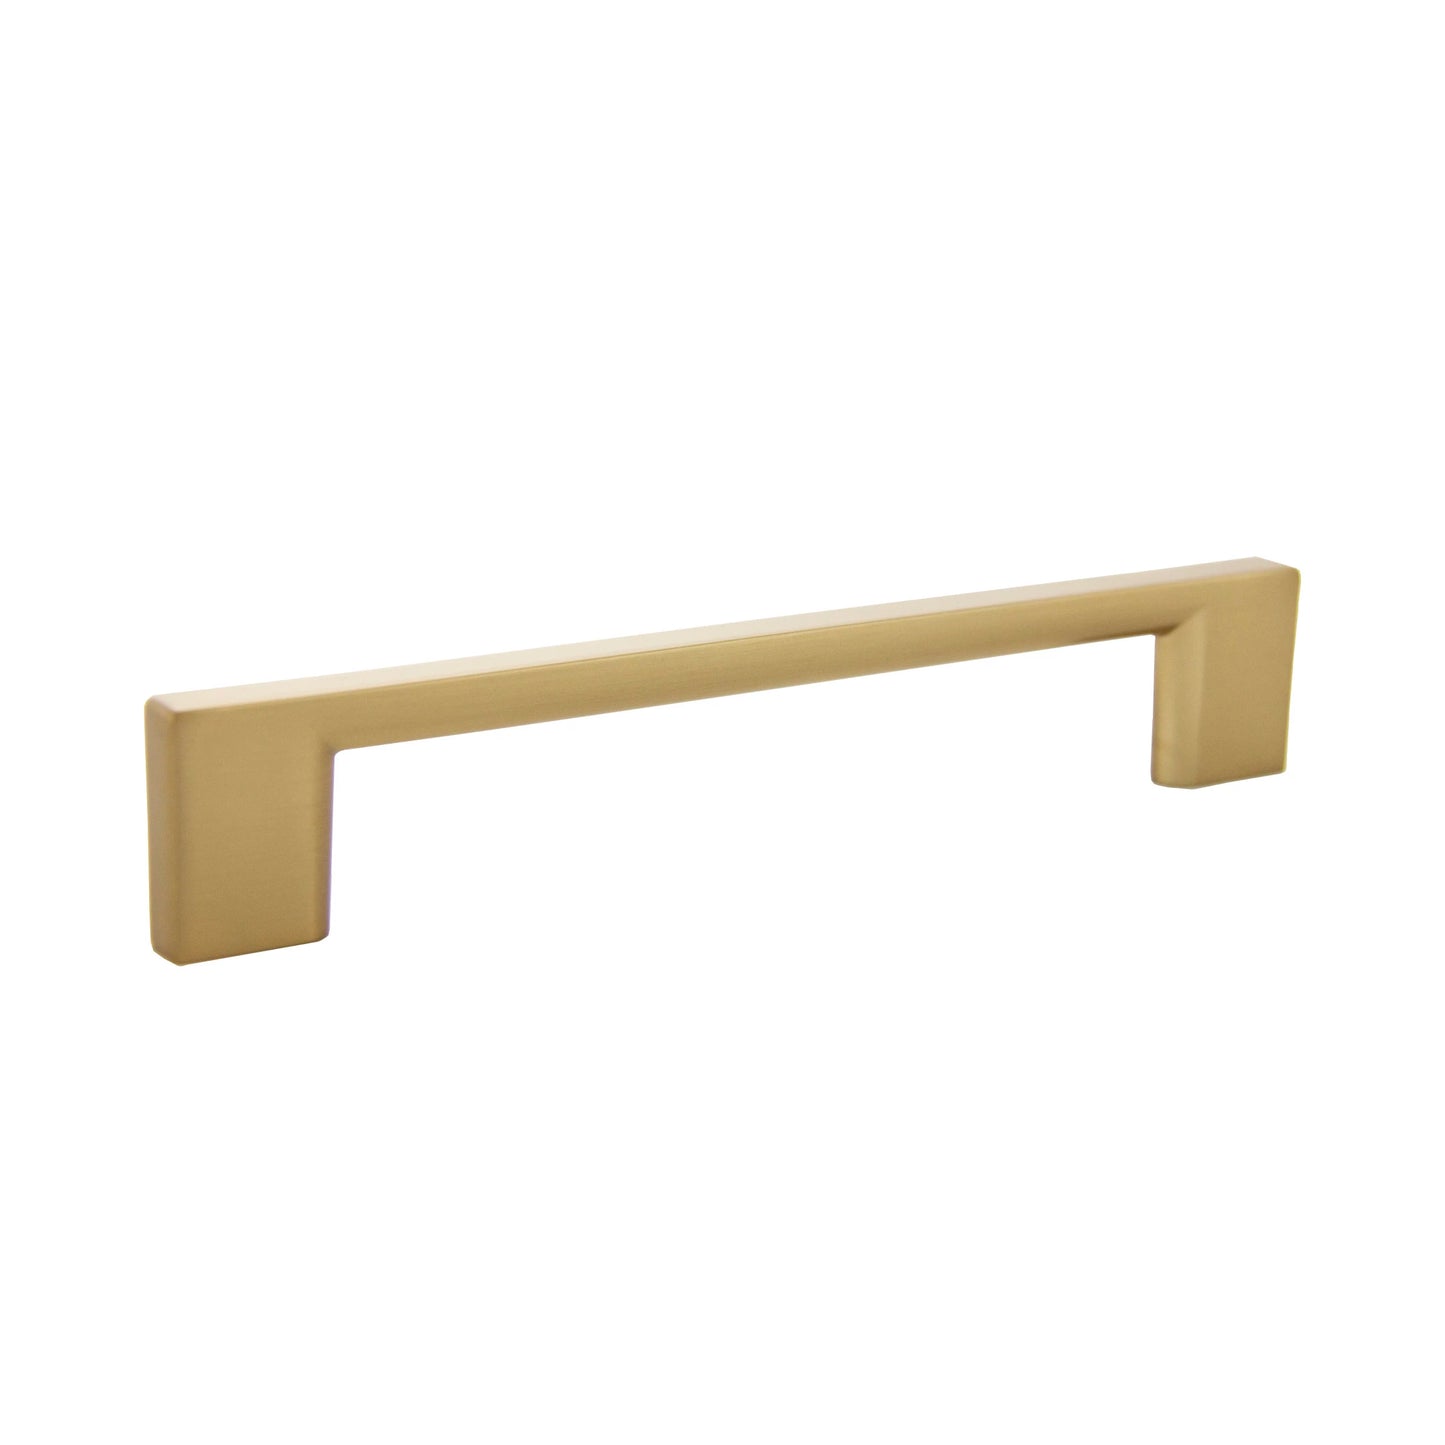 5-Inch Downtown Kitchen & Bath Cabinet Rectangle Bar Pull